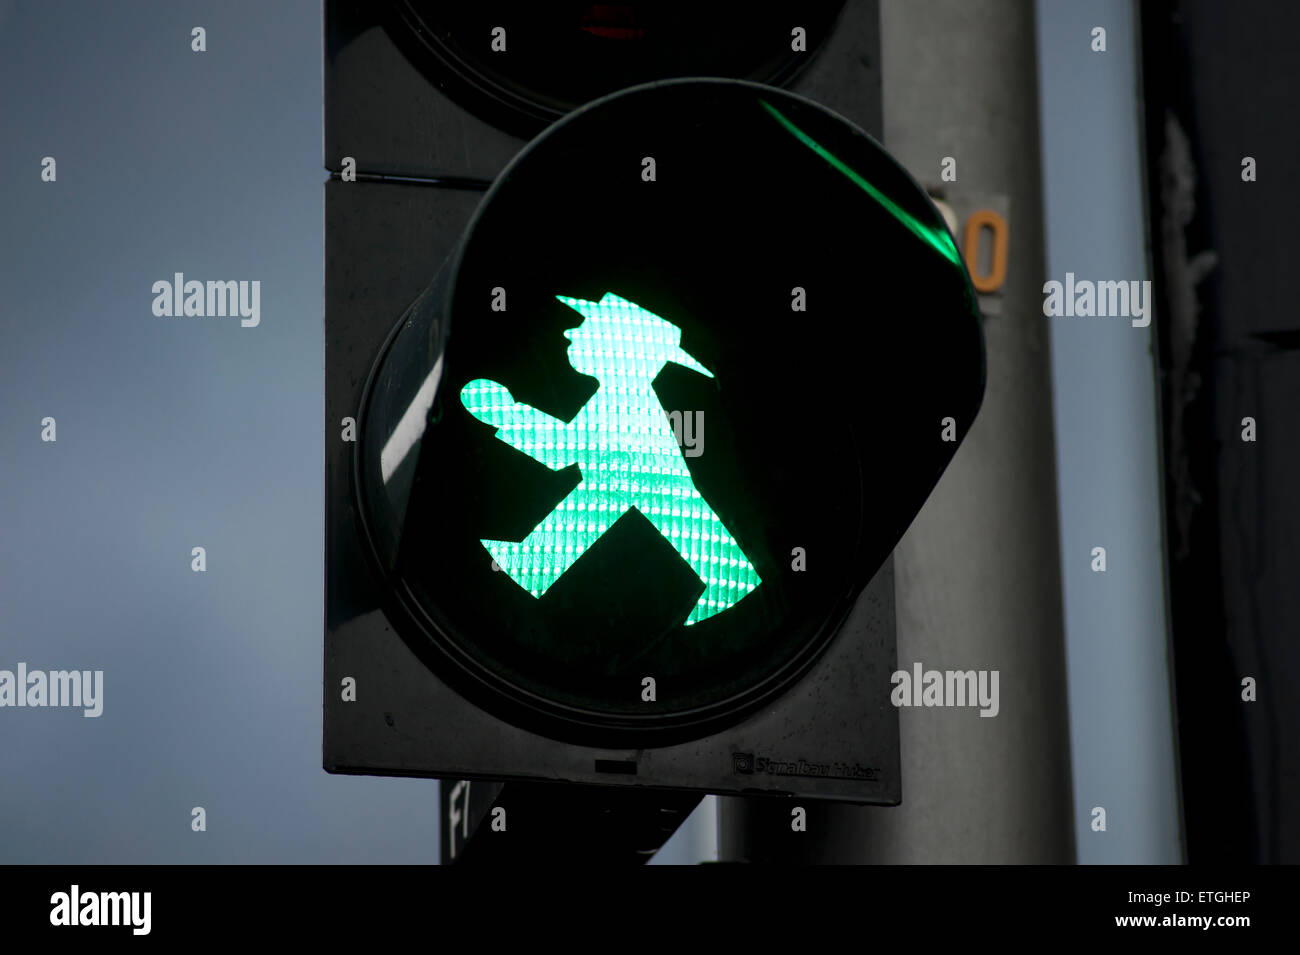 East German Ampelmaennchen, green traffic light for pedestrians for go, relic of former GDR times in East Berlin Germany Europe Stock Photo